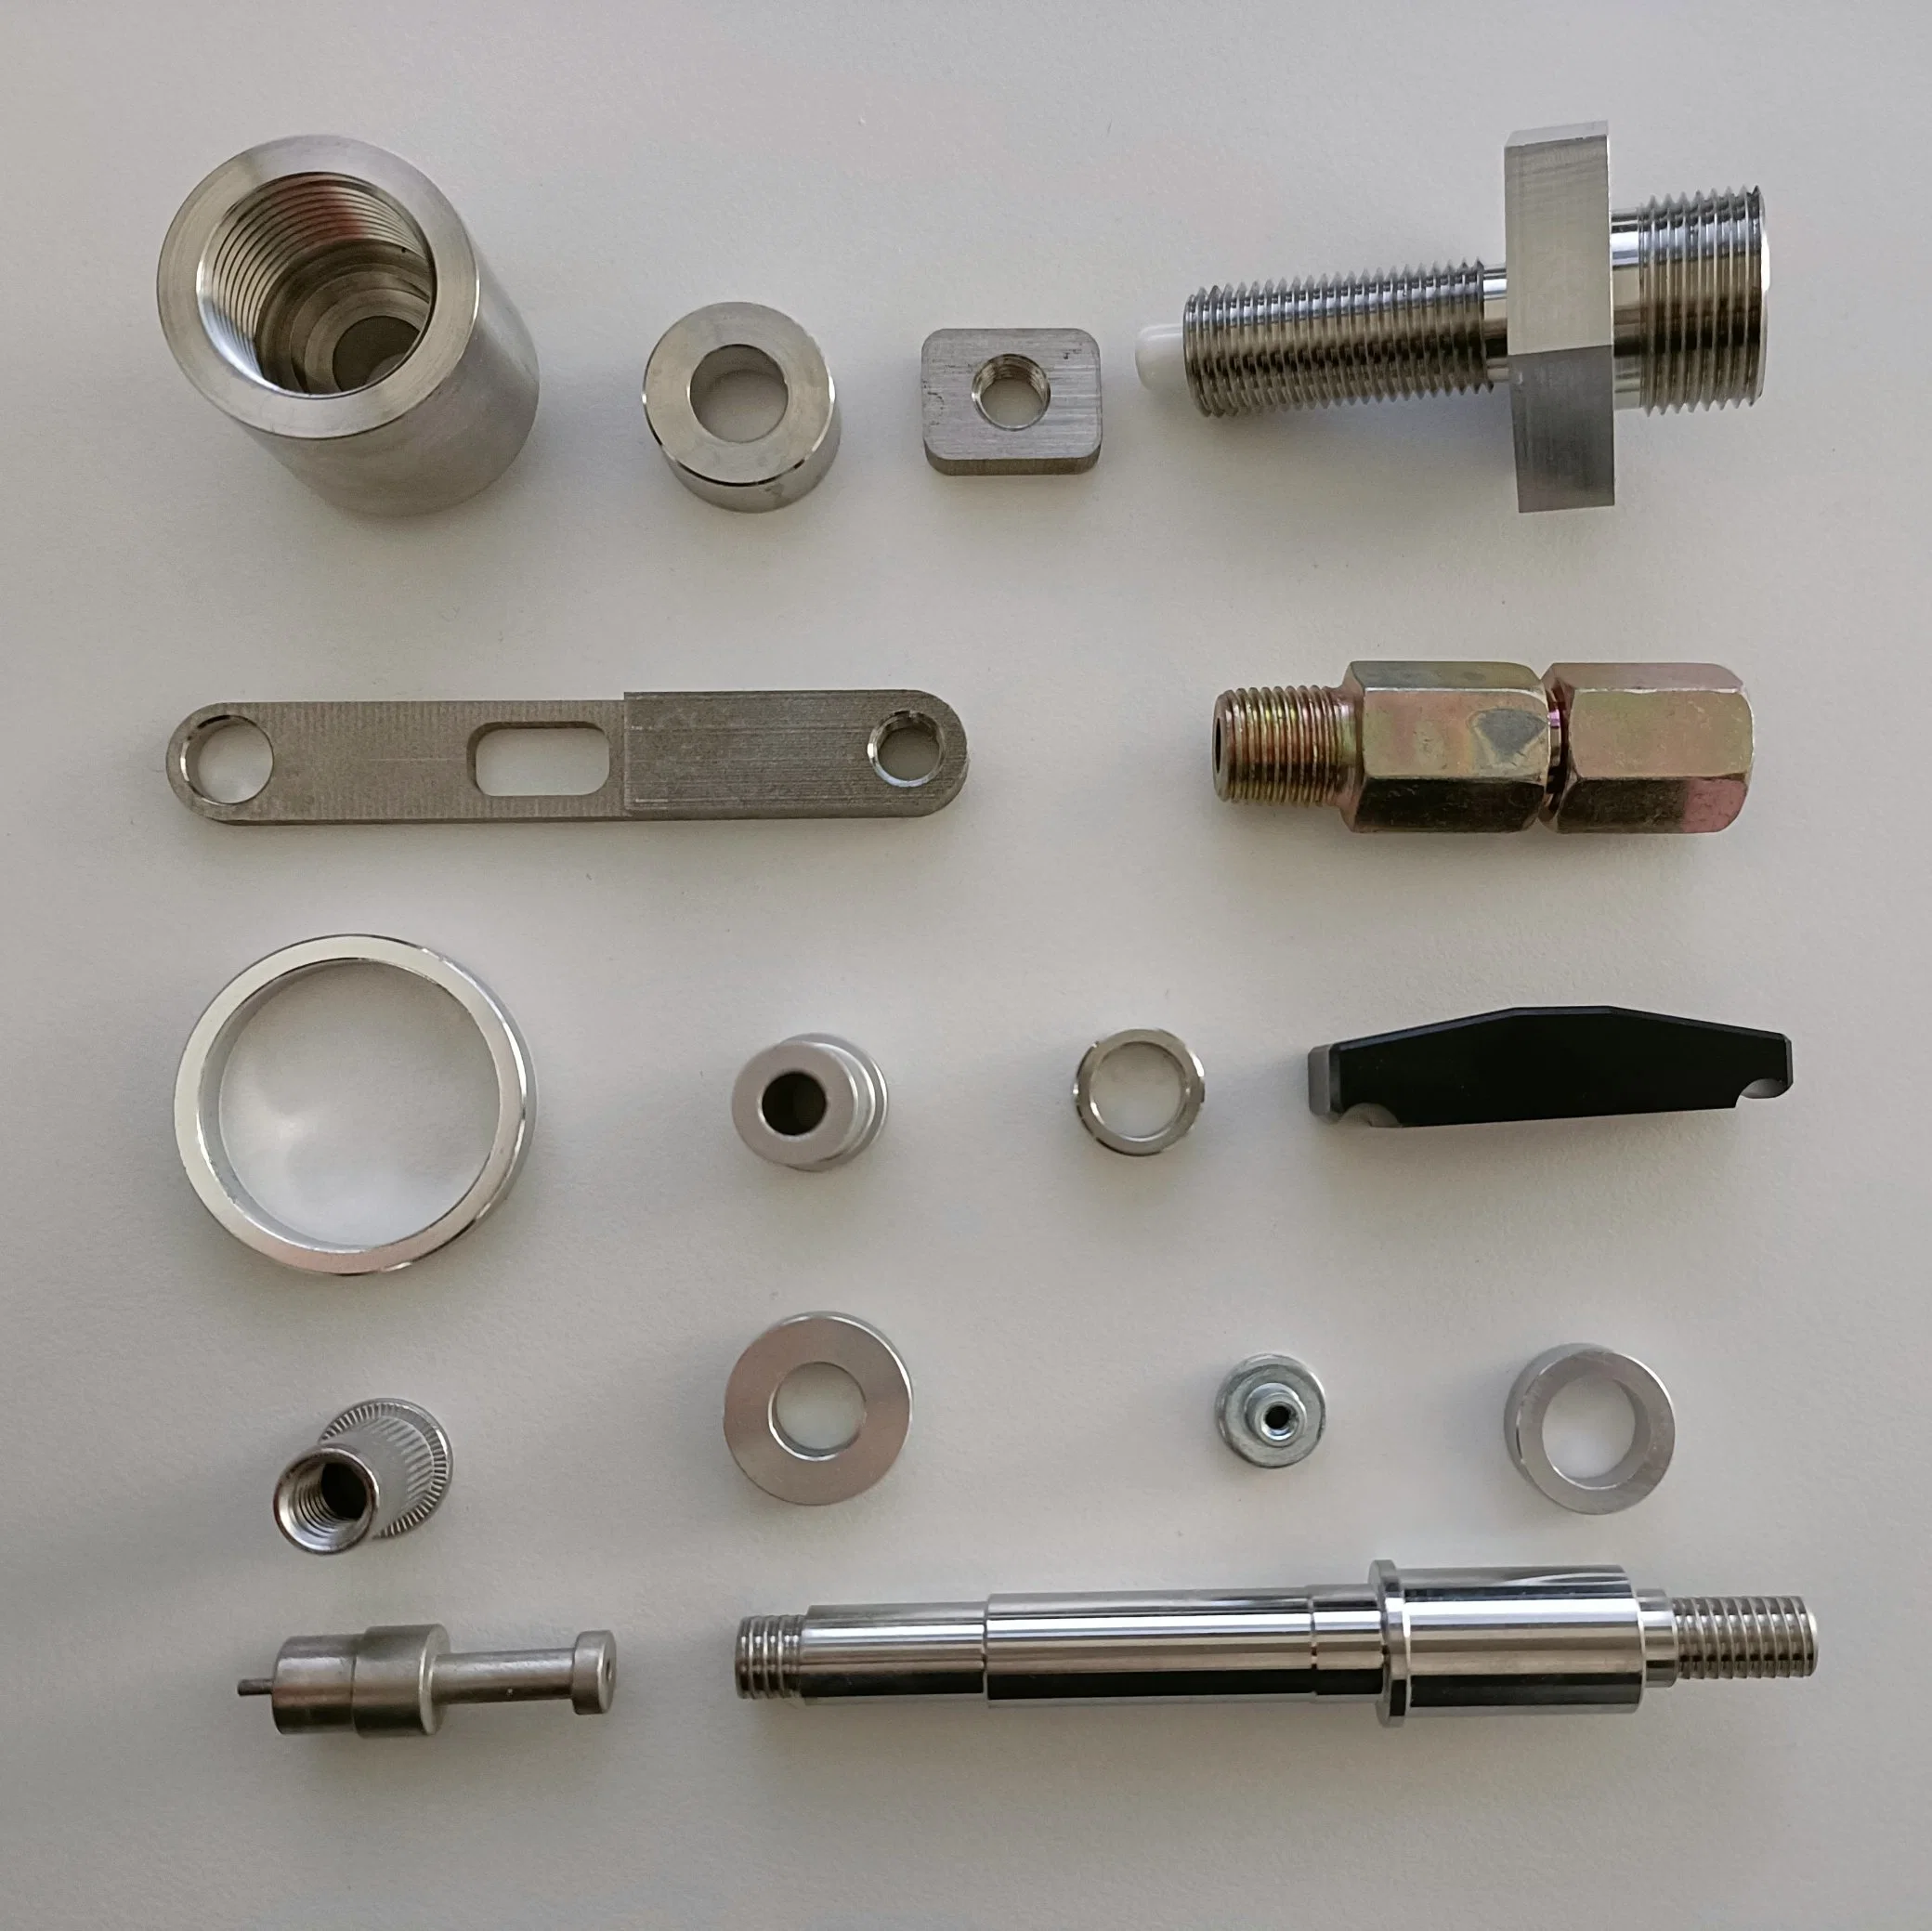 Sgj Customized High Precision Machined Metal Parts by Stainless Steel, Aluminum, Copper, Iron, Kovar Alloy, etc.